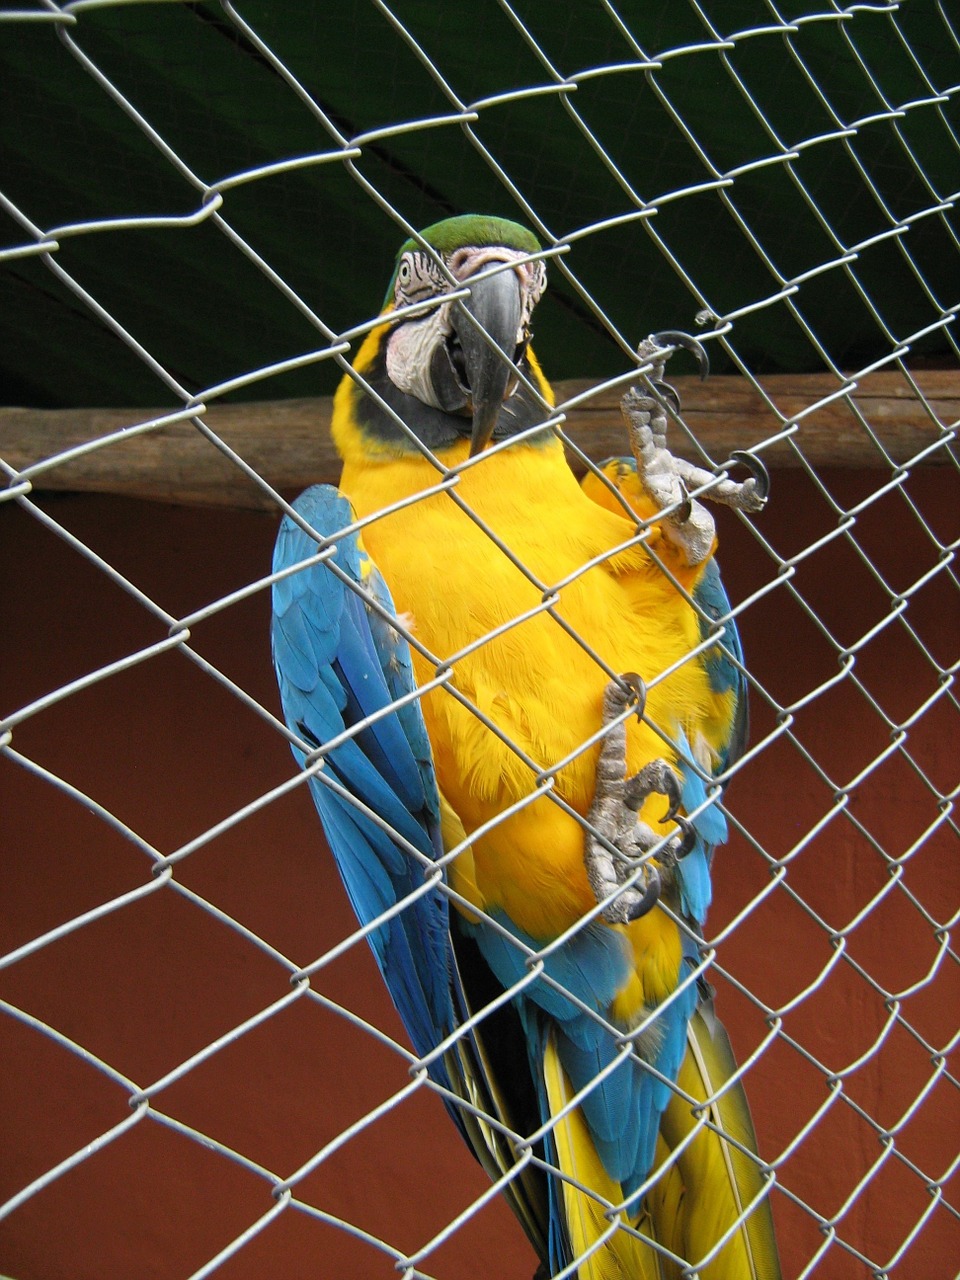 parrot ave cage free photo